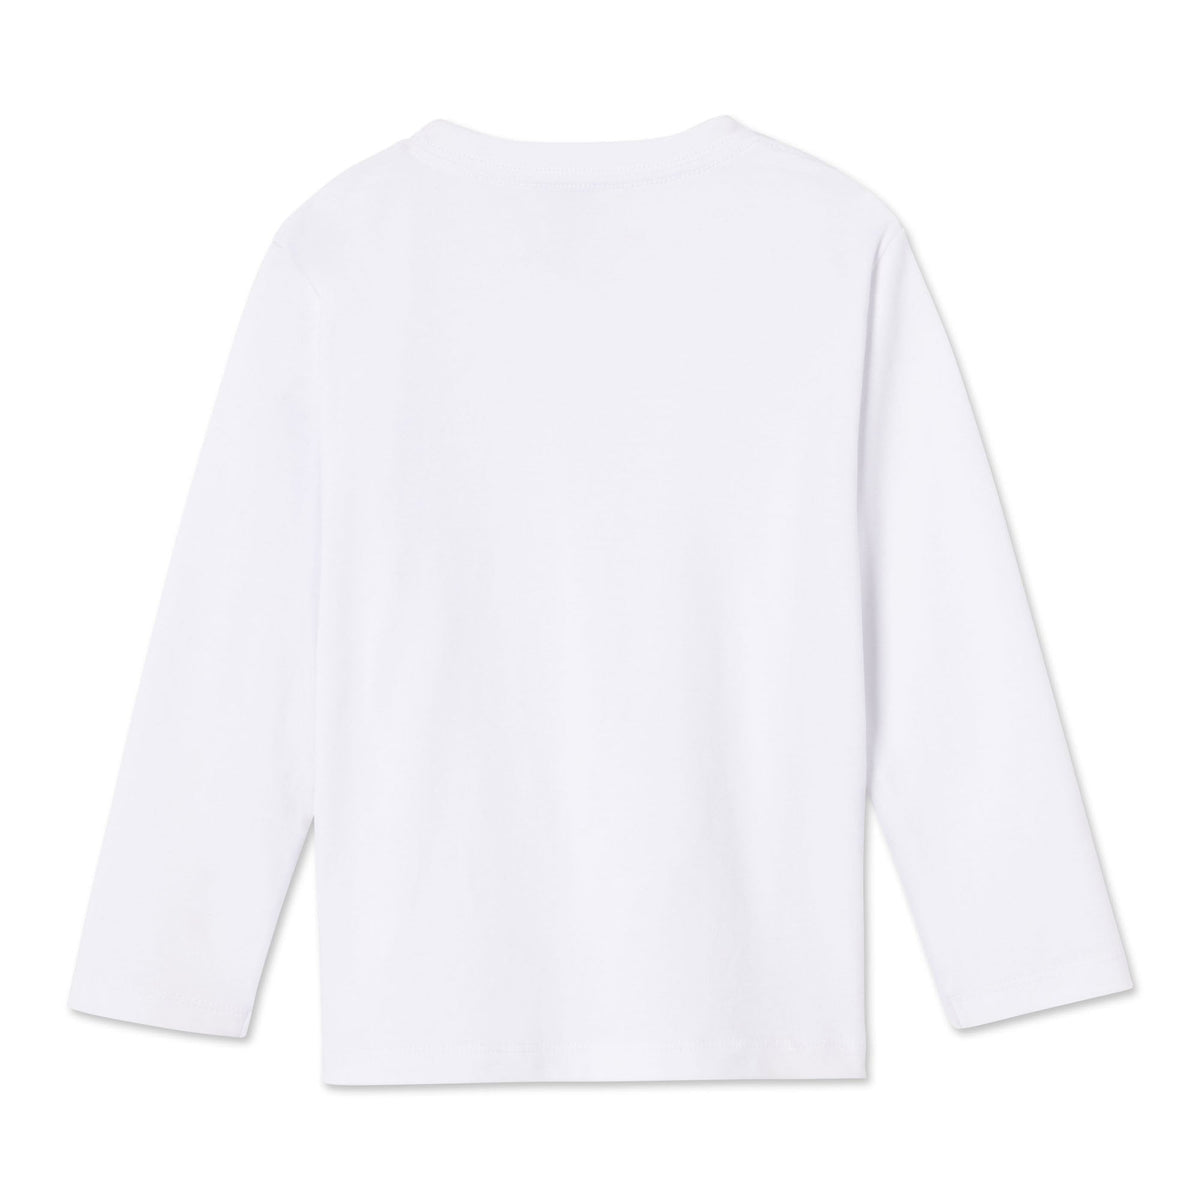 Classic and Preppy Kellan Long Sleeve Pocket T-Shirt Solid, Bright White-Shirts and Tops-CPC - Classic Prep Childrenswear